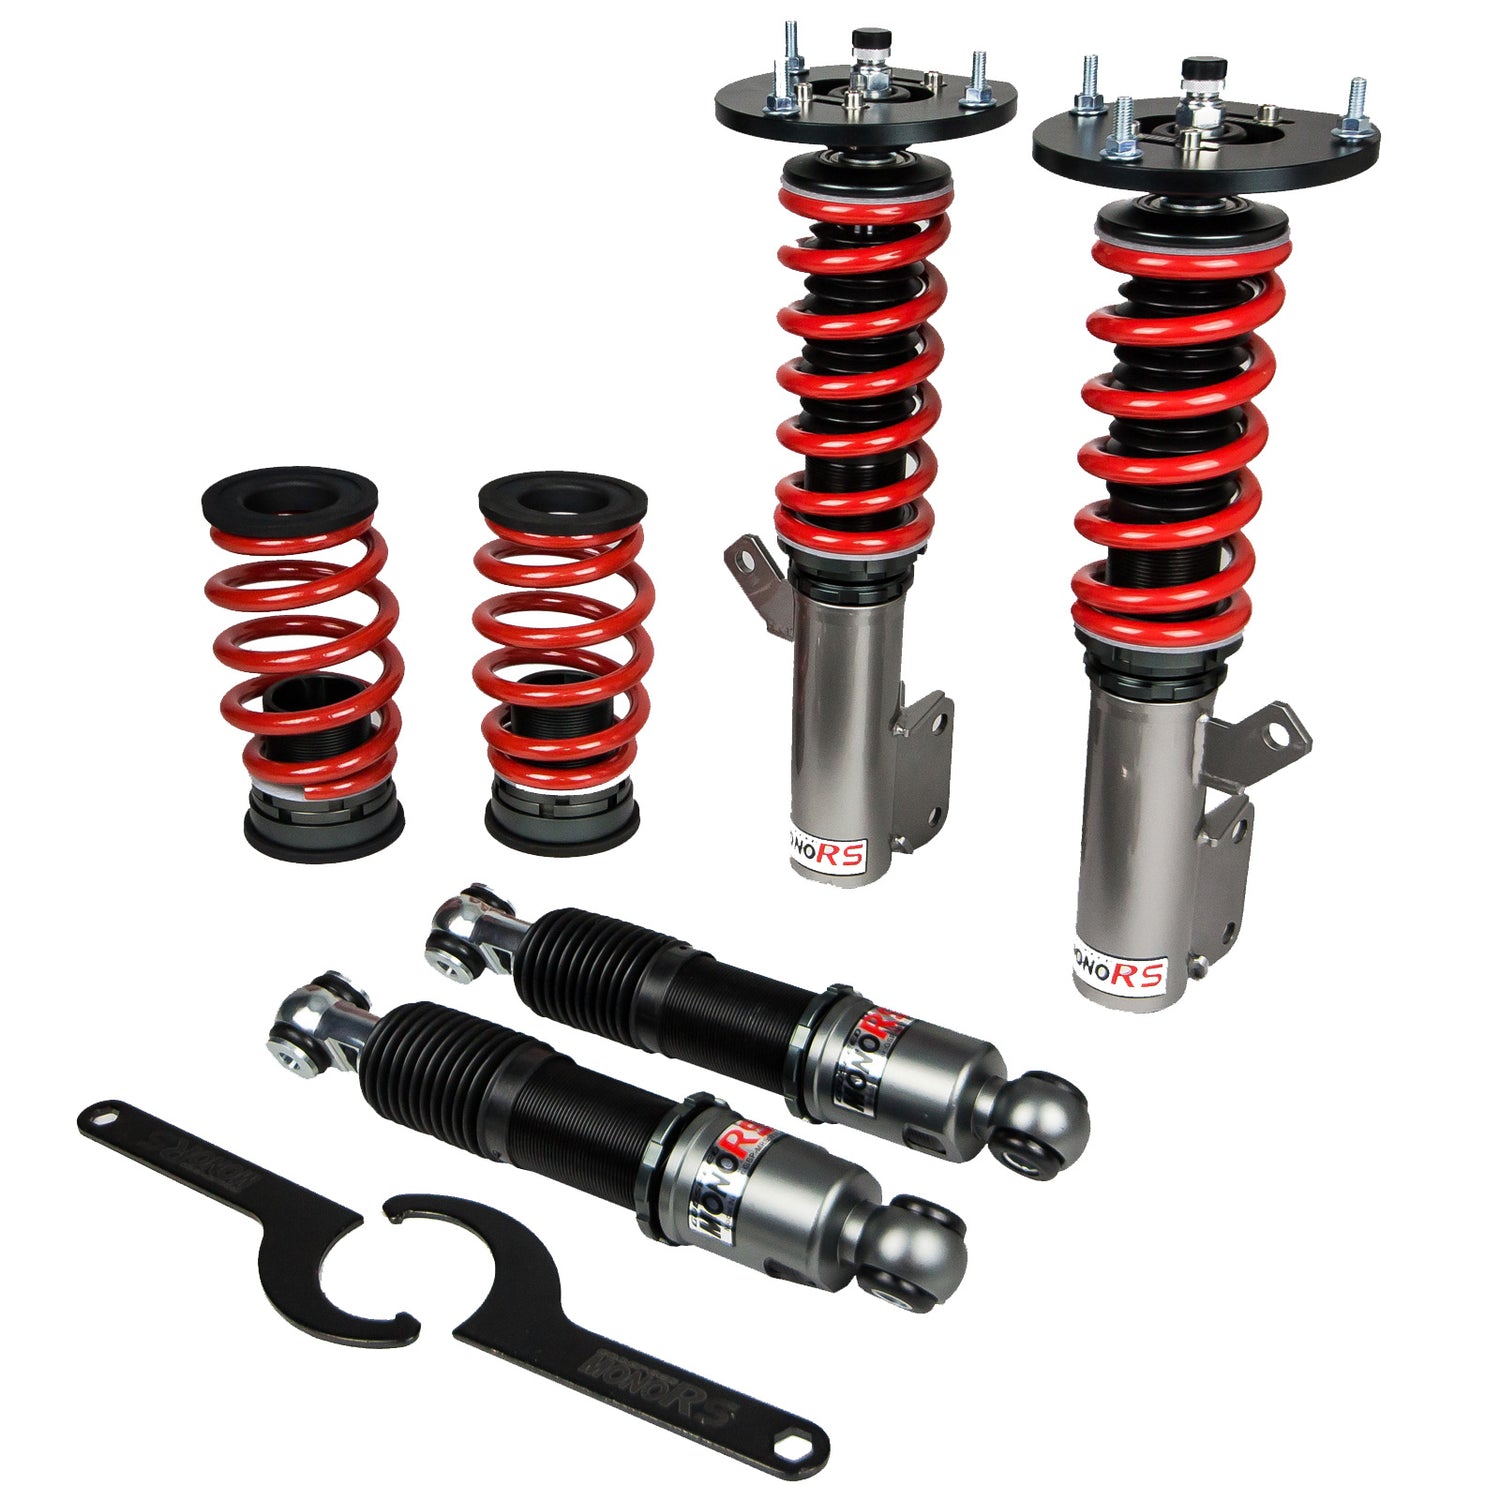 Godspeed MRS1770-B MonoRS Coilover Lowering Kit, 32 Damping Adjustment, Ride Height Adjustable